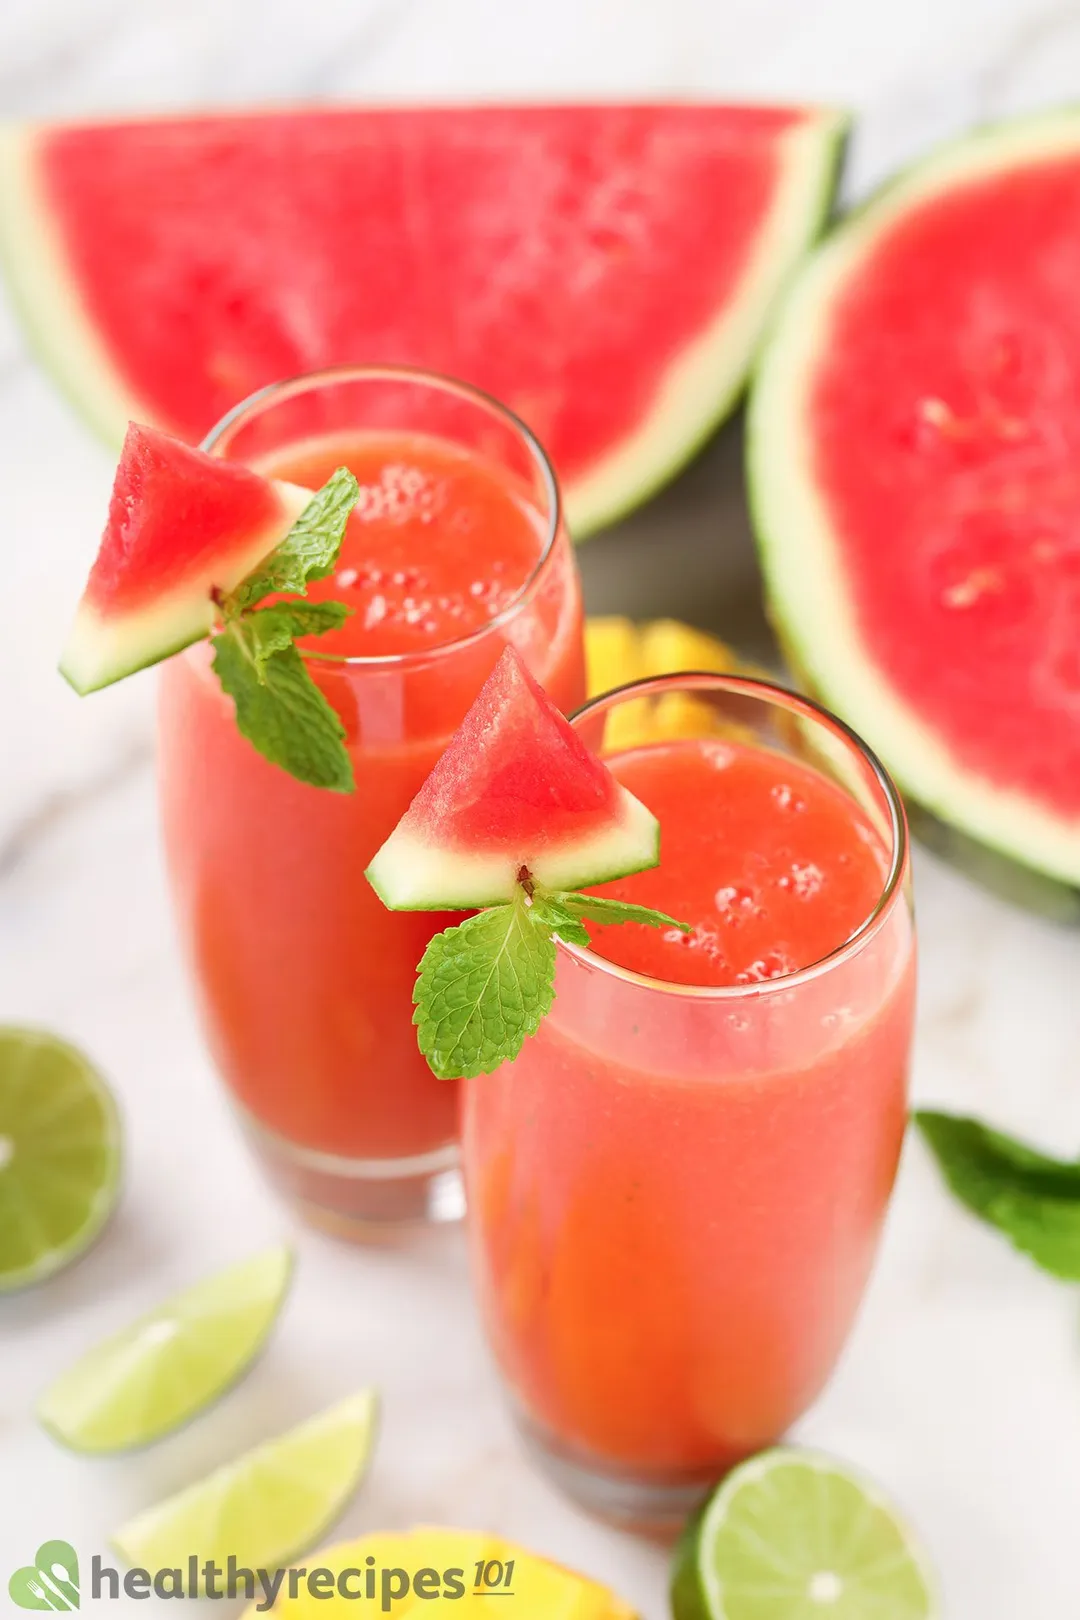 Two glasses of Mango Watermelon Smoothie placed near two halves of a watermelon, lime wedges, and mint leaves.